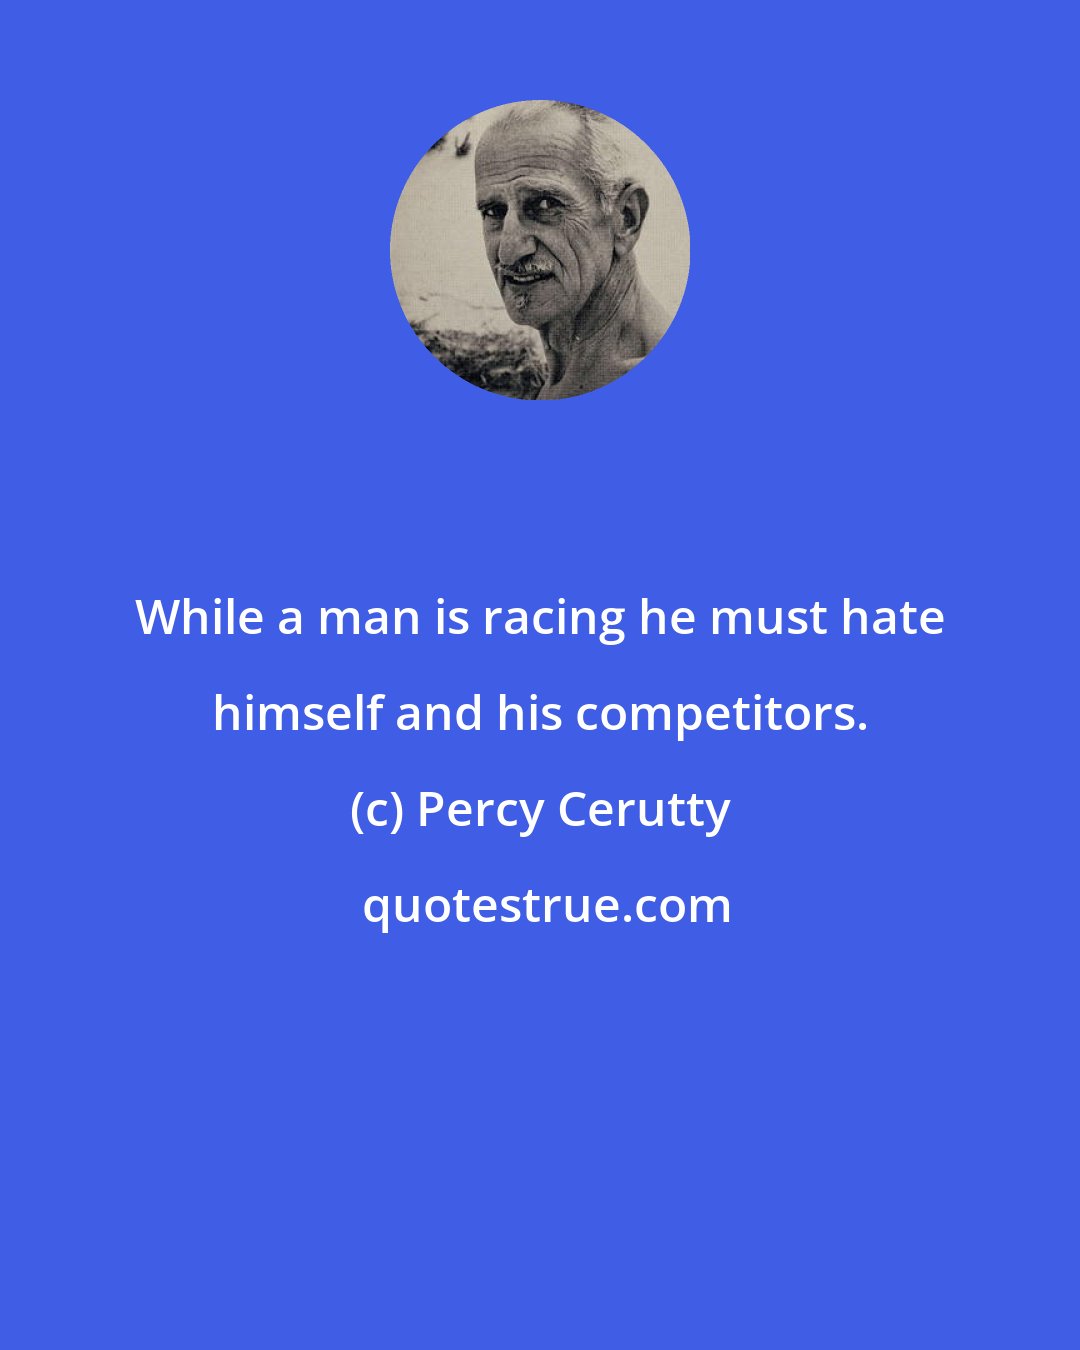 Percy Cerutty: While a man is racing he must hate himself and his competitors.